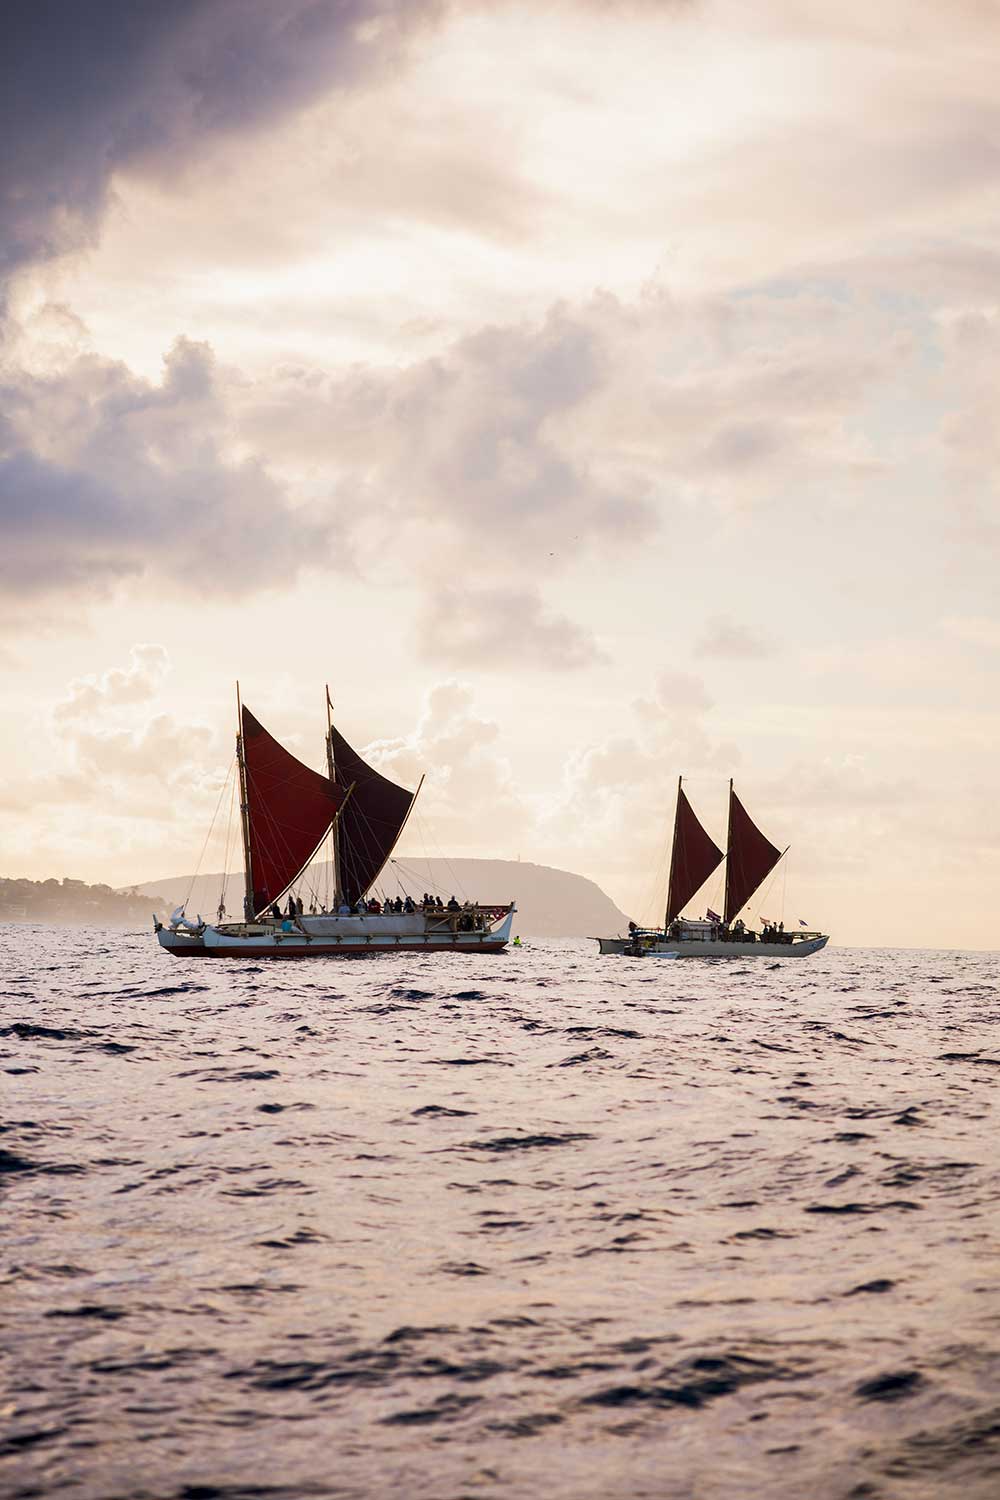 Through filmmaking, a rare documentative opportunity of the voyaging canoe Hōkūle‘a arrives to the screen.